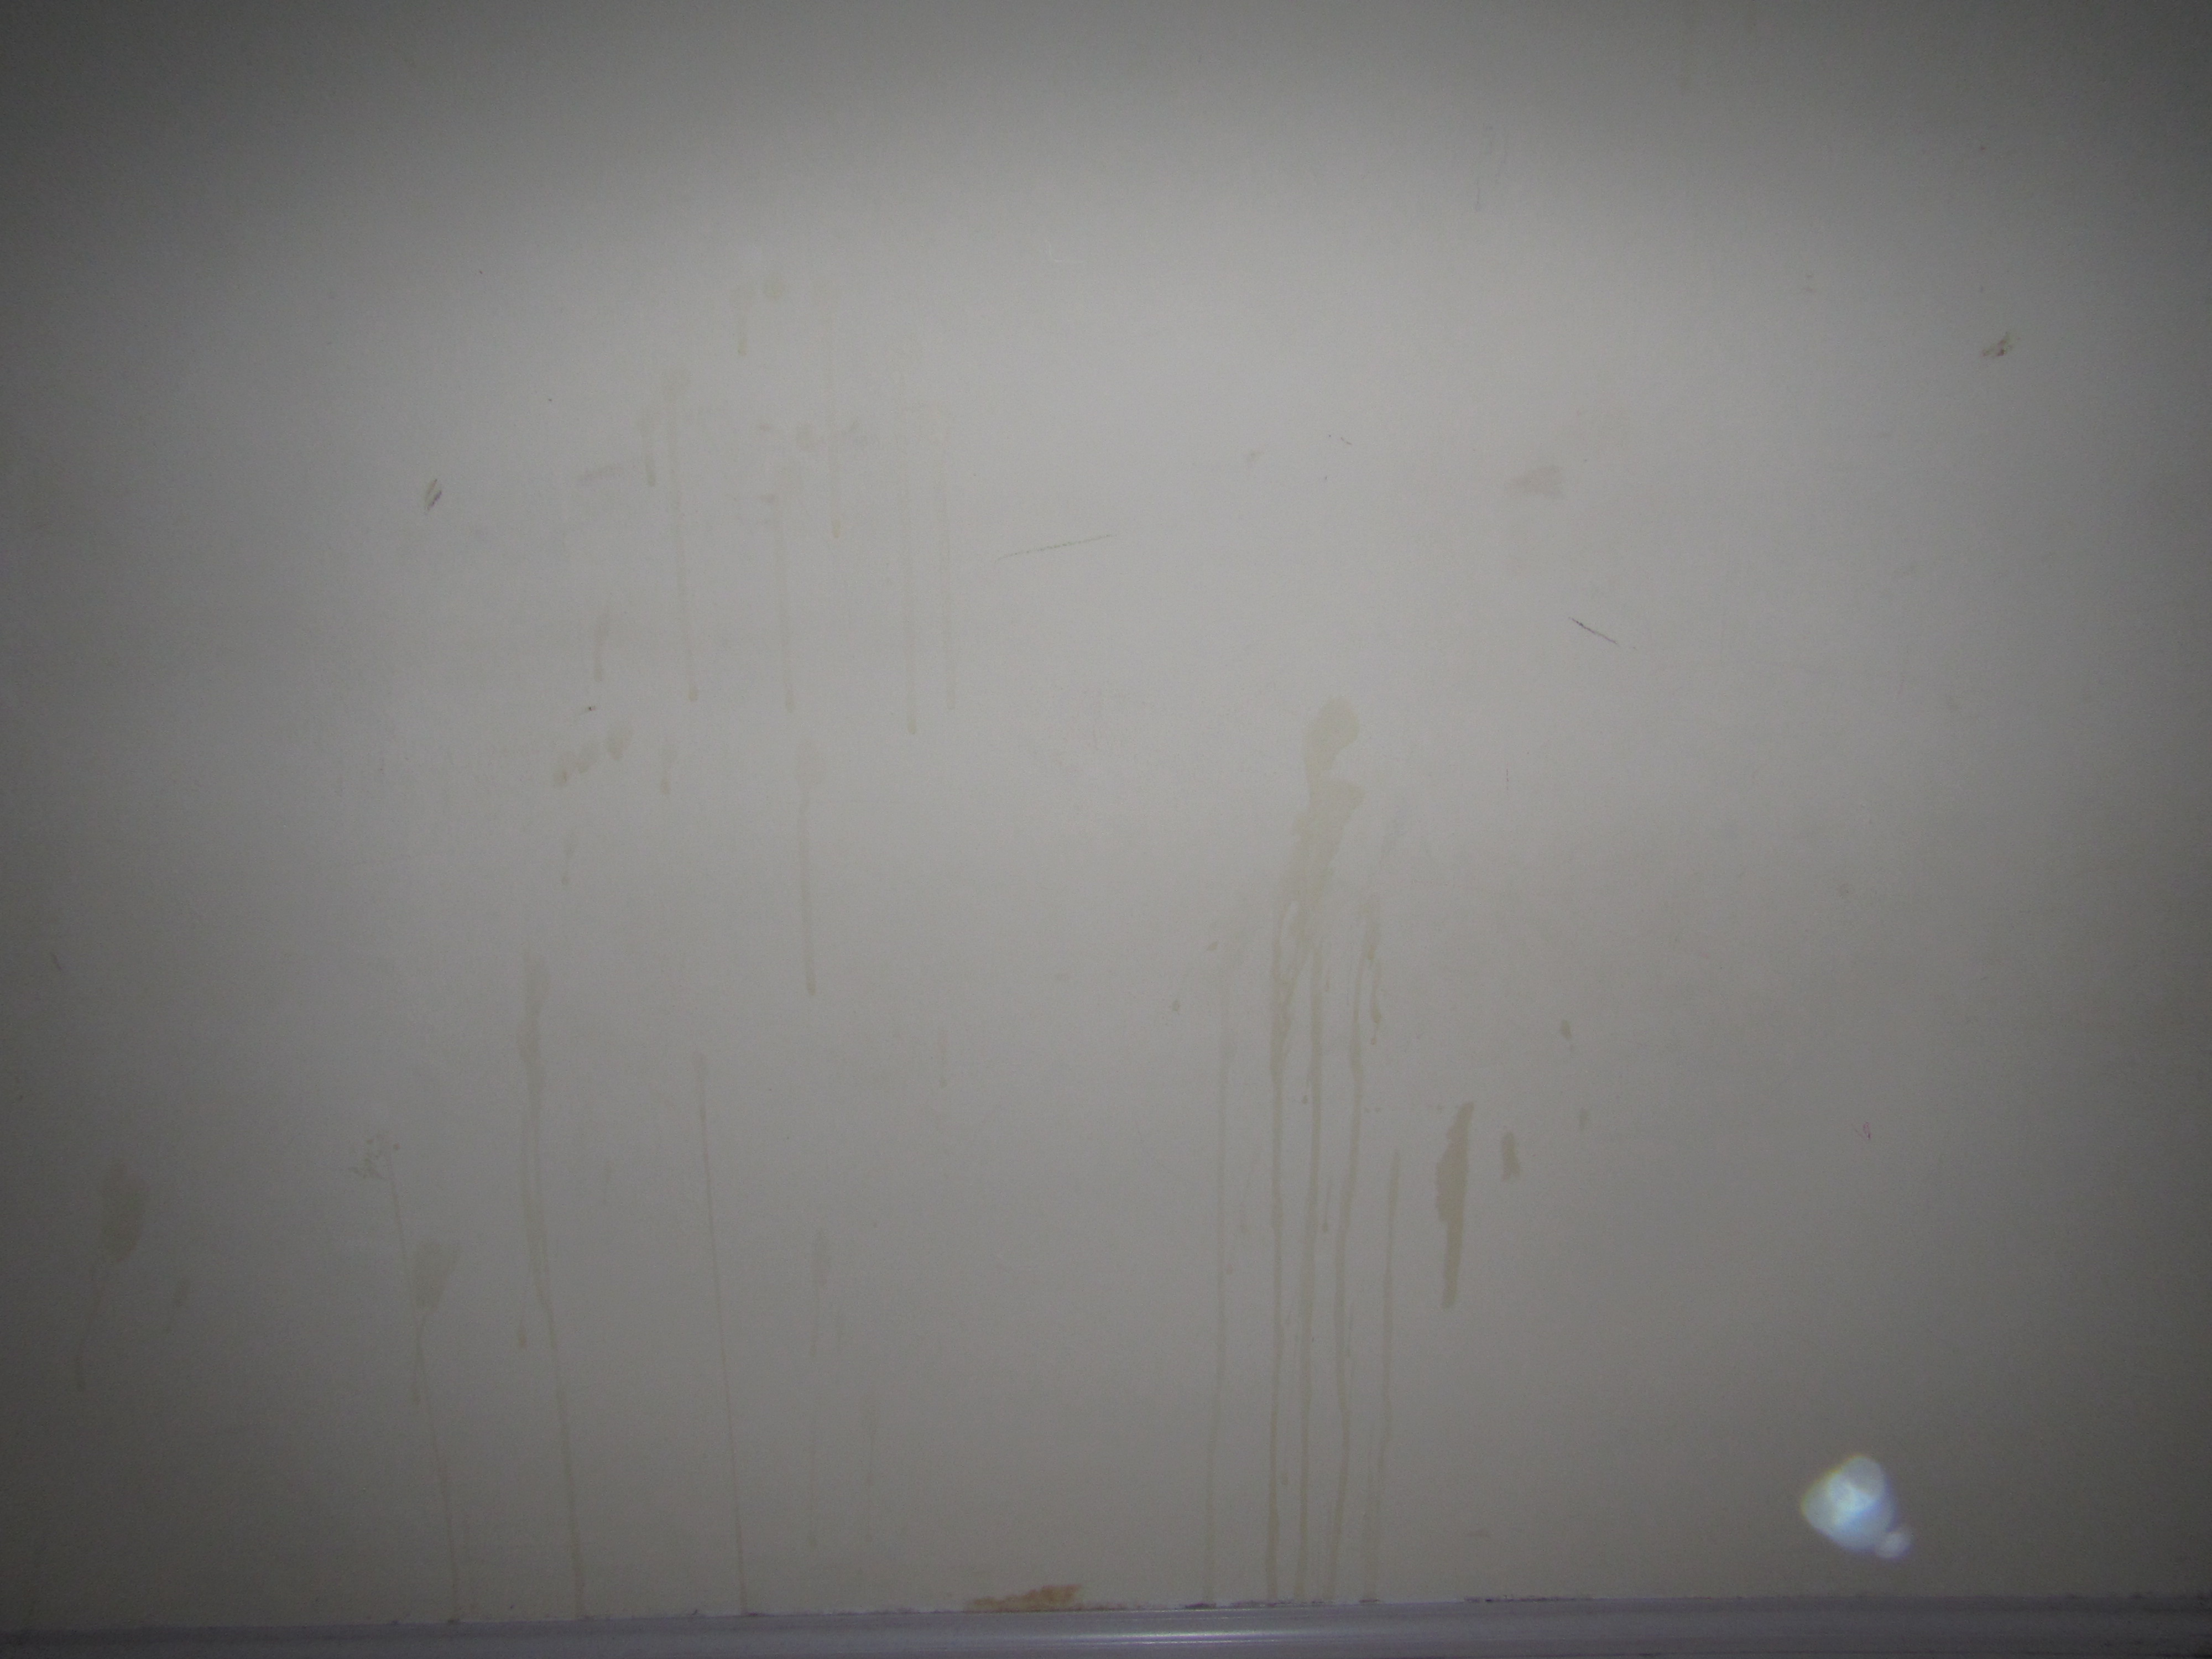 I should add that the majority of these stains were visible without me pulling the bed out from the wall...which means that this particular hostel just didn't like cleaning this sort of stuff...so they just left it there instead...